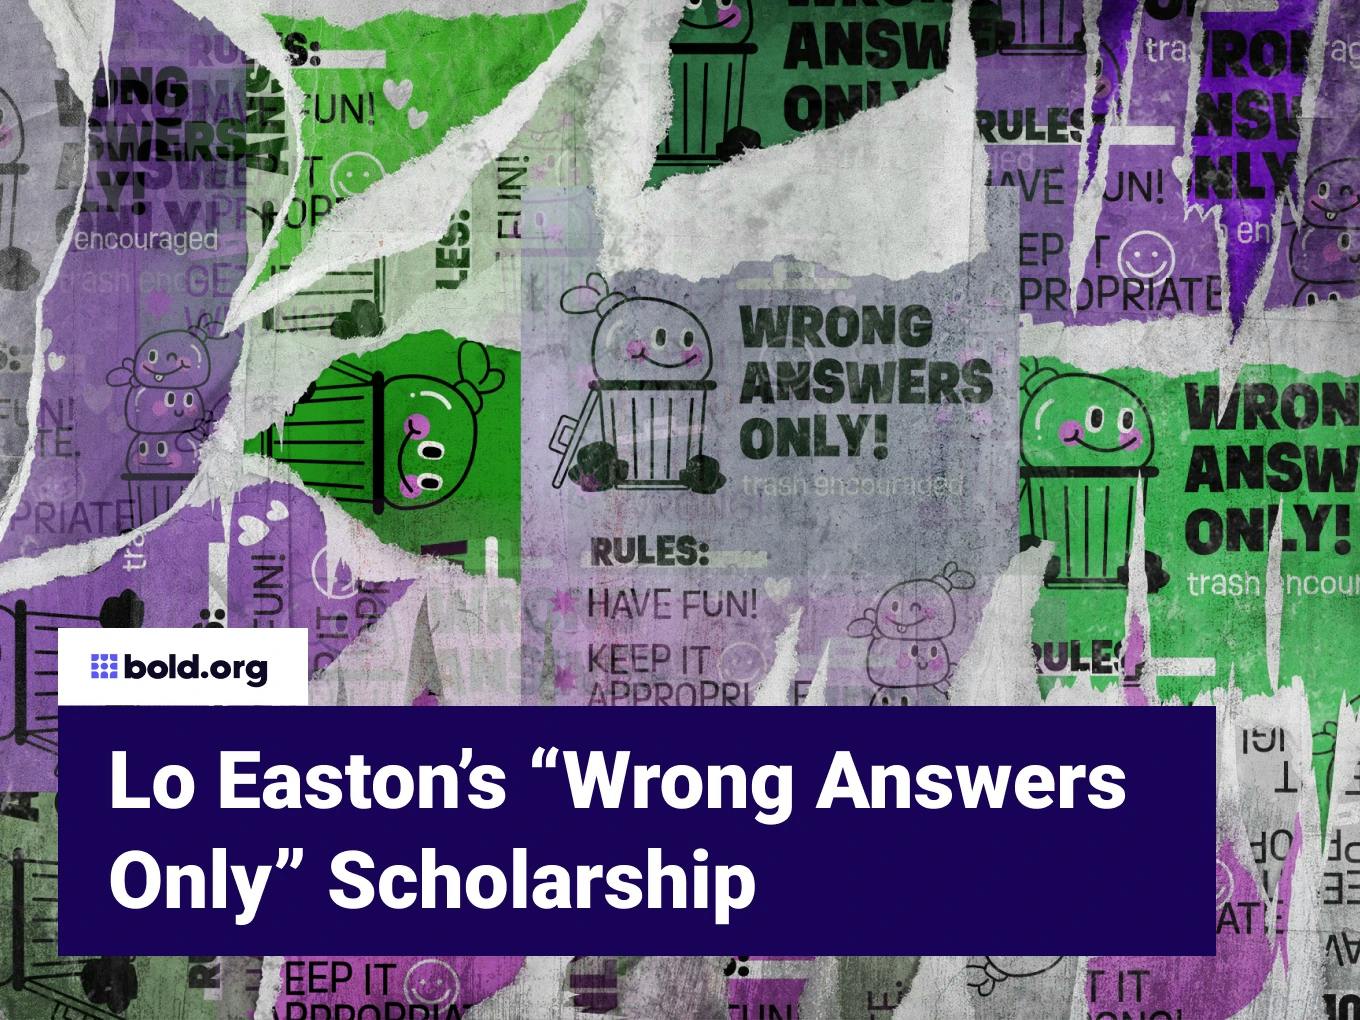 Lo Easton's “Wrong Answers Only” Scholarship